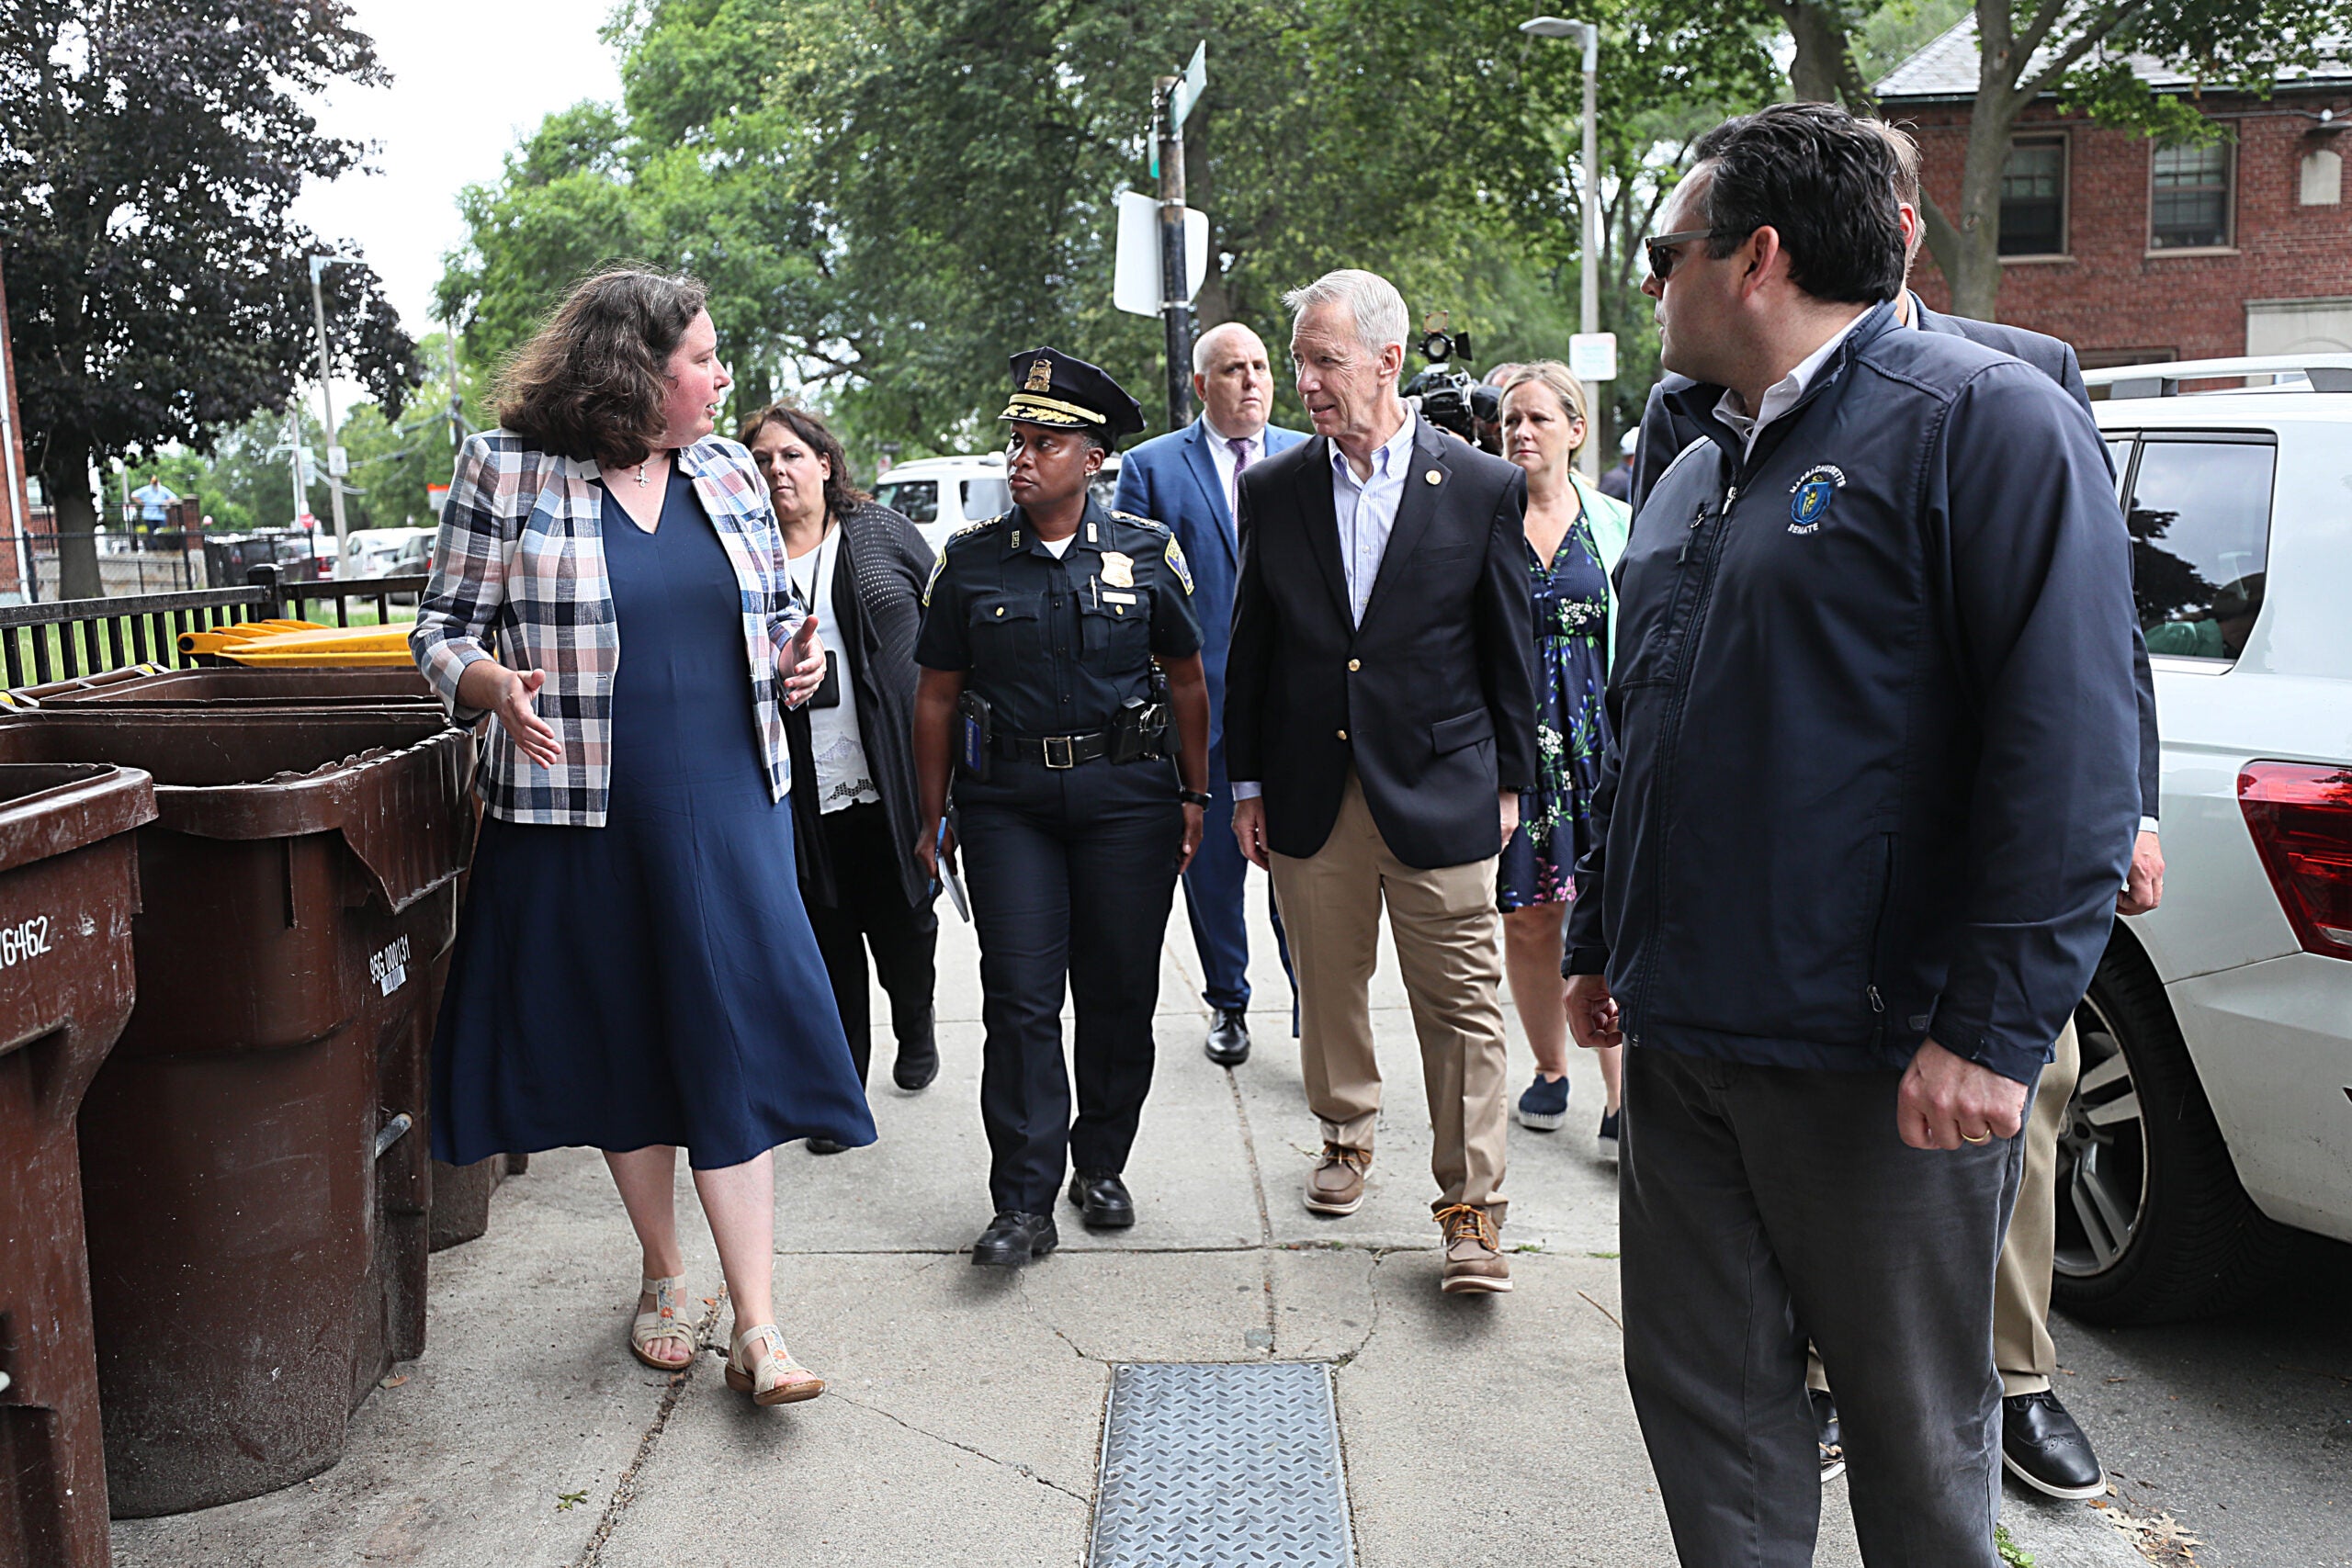 Several Boston politicians and officials tour a South Boston public housing complex outdoors on foot. They are pictured in various states of business or work attire, mid-conversation.